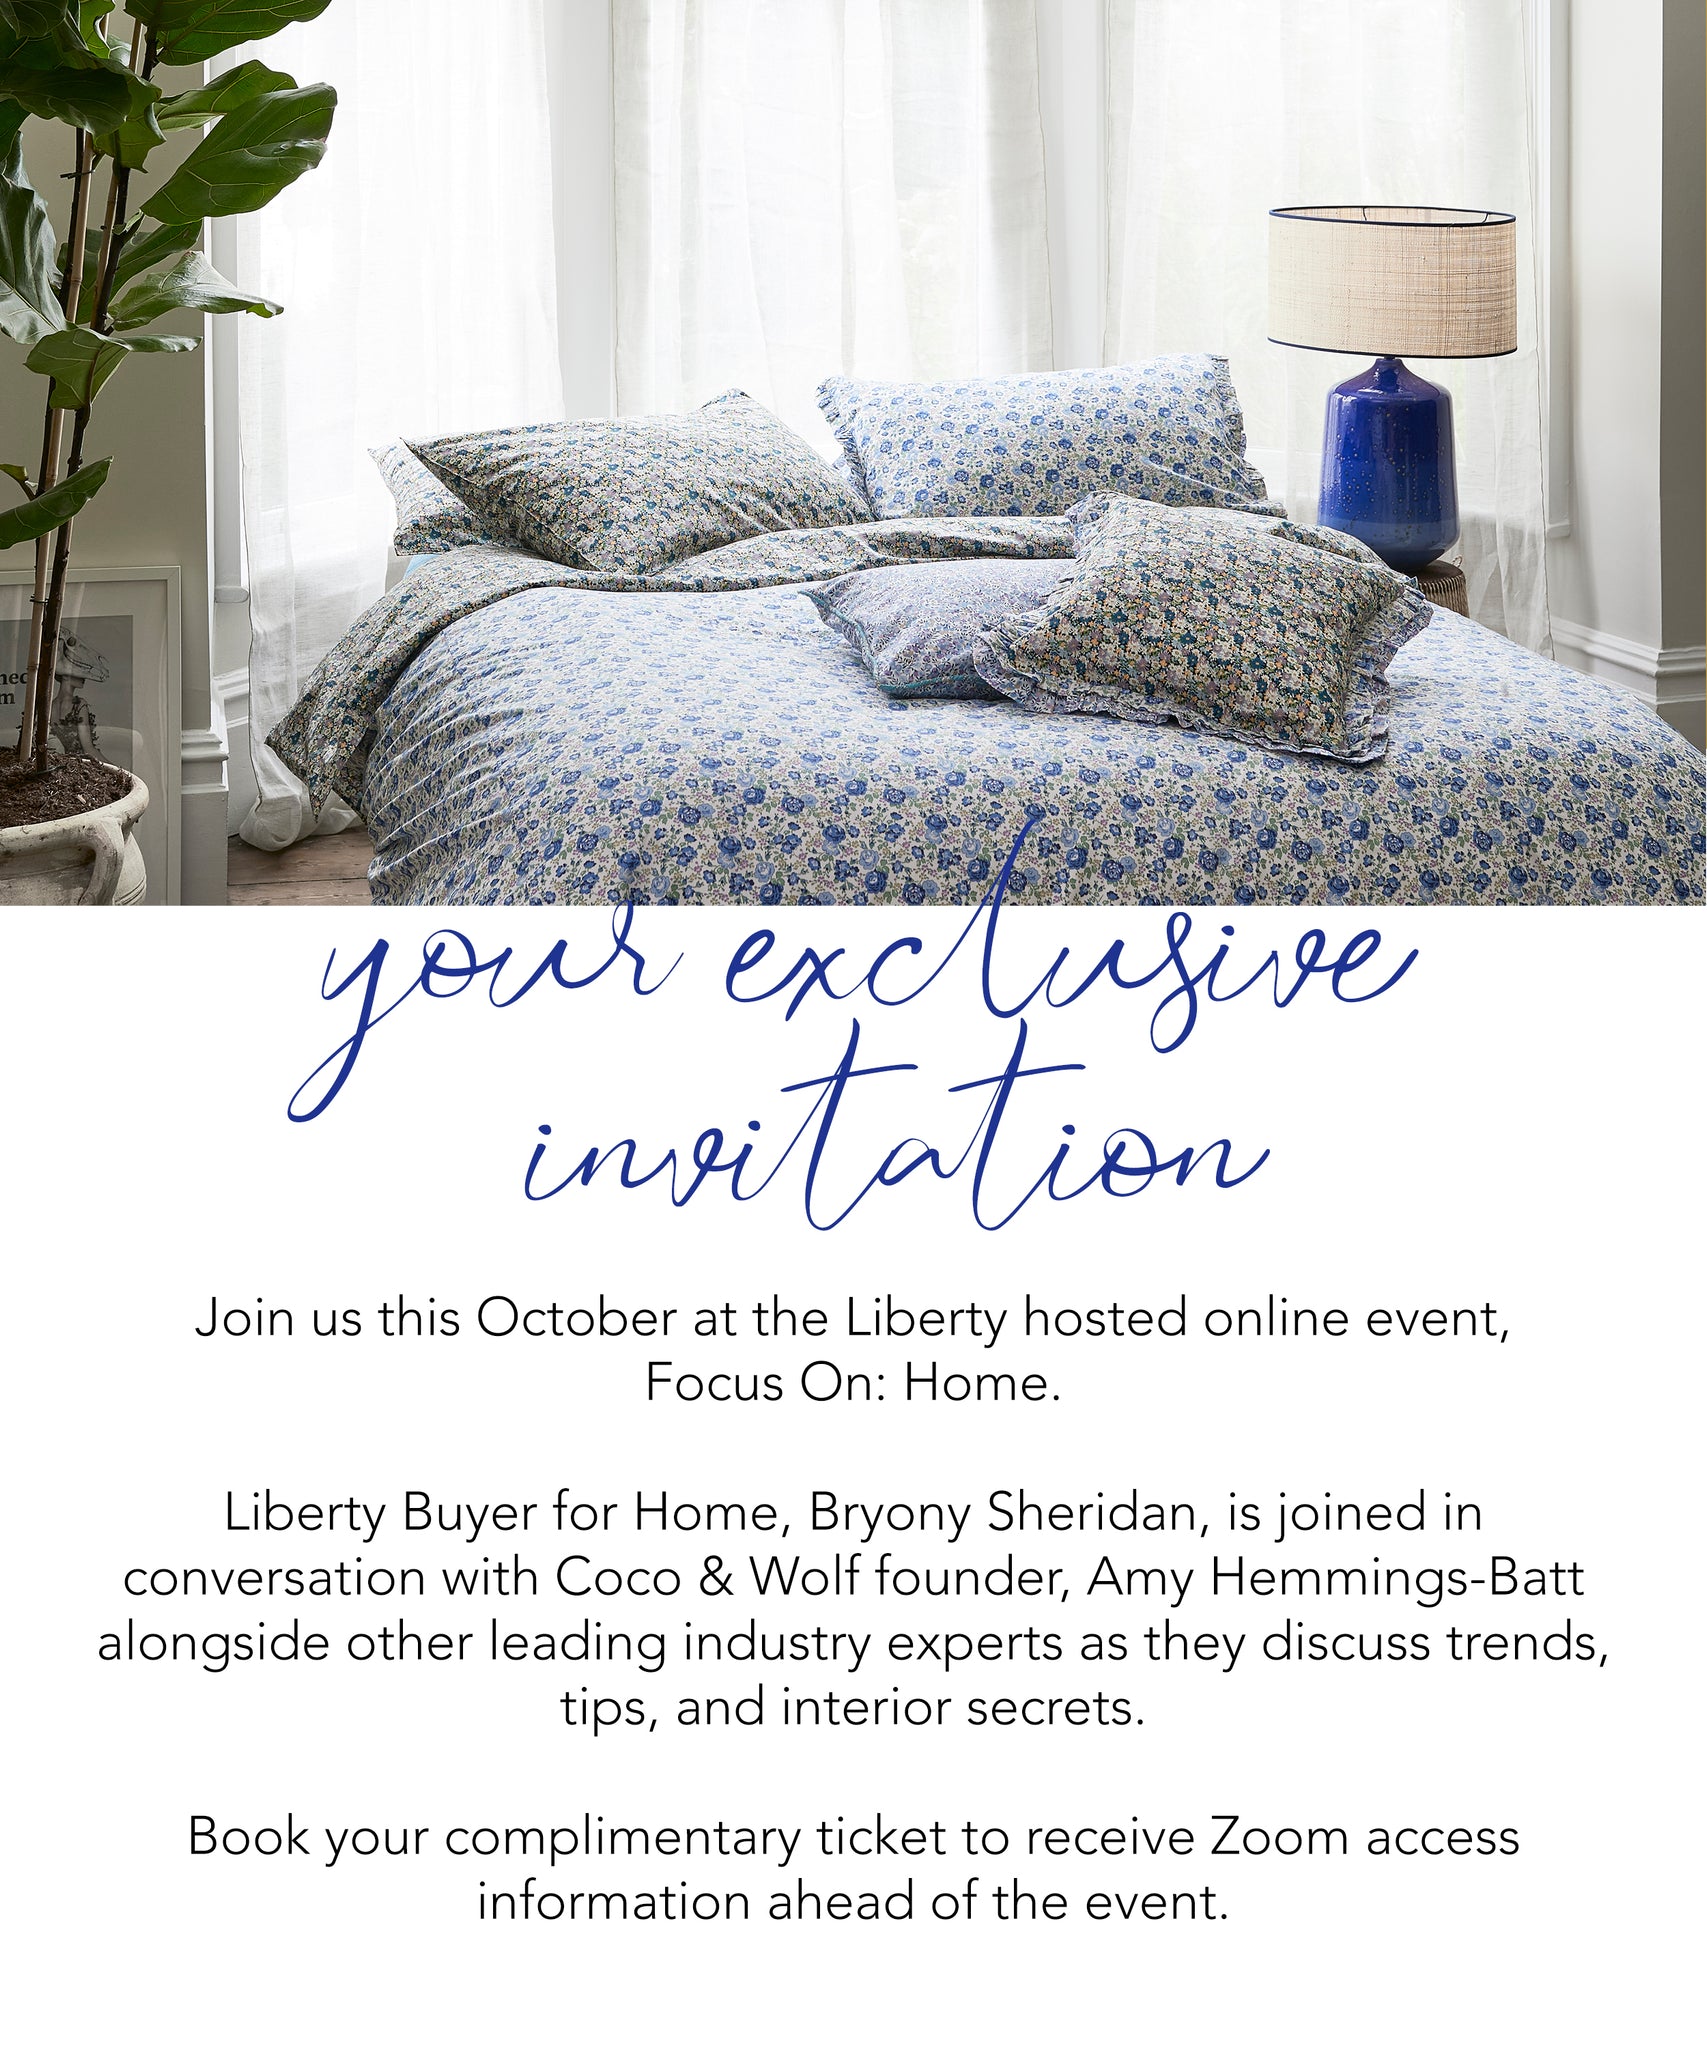 Exclusive invitation to Liberty's online event with Coco & Wolf founder, Amy.